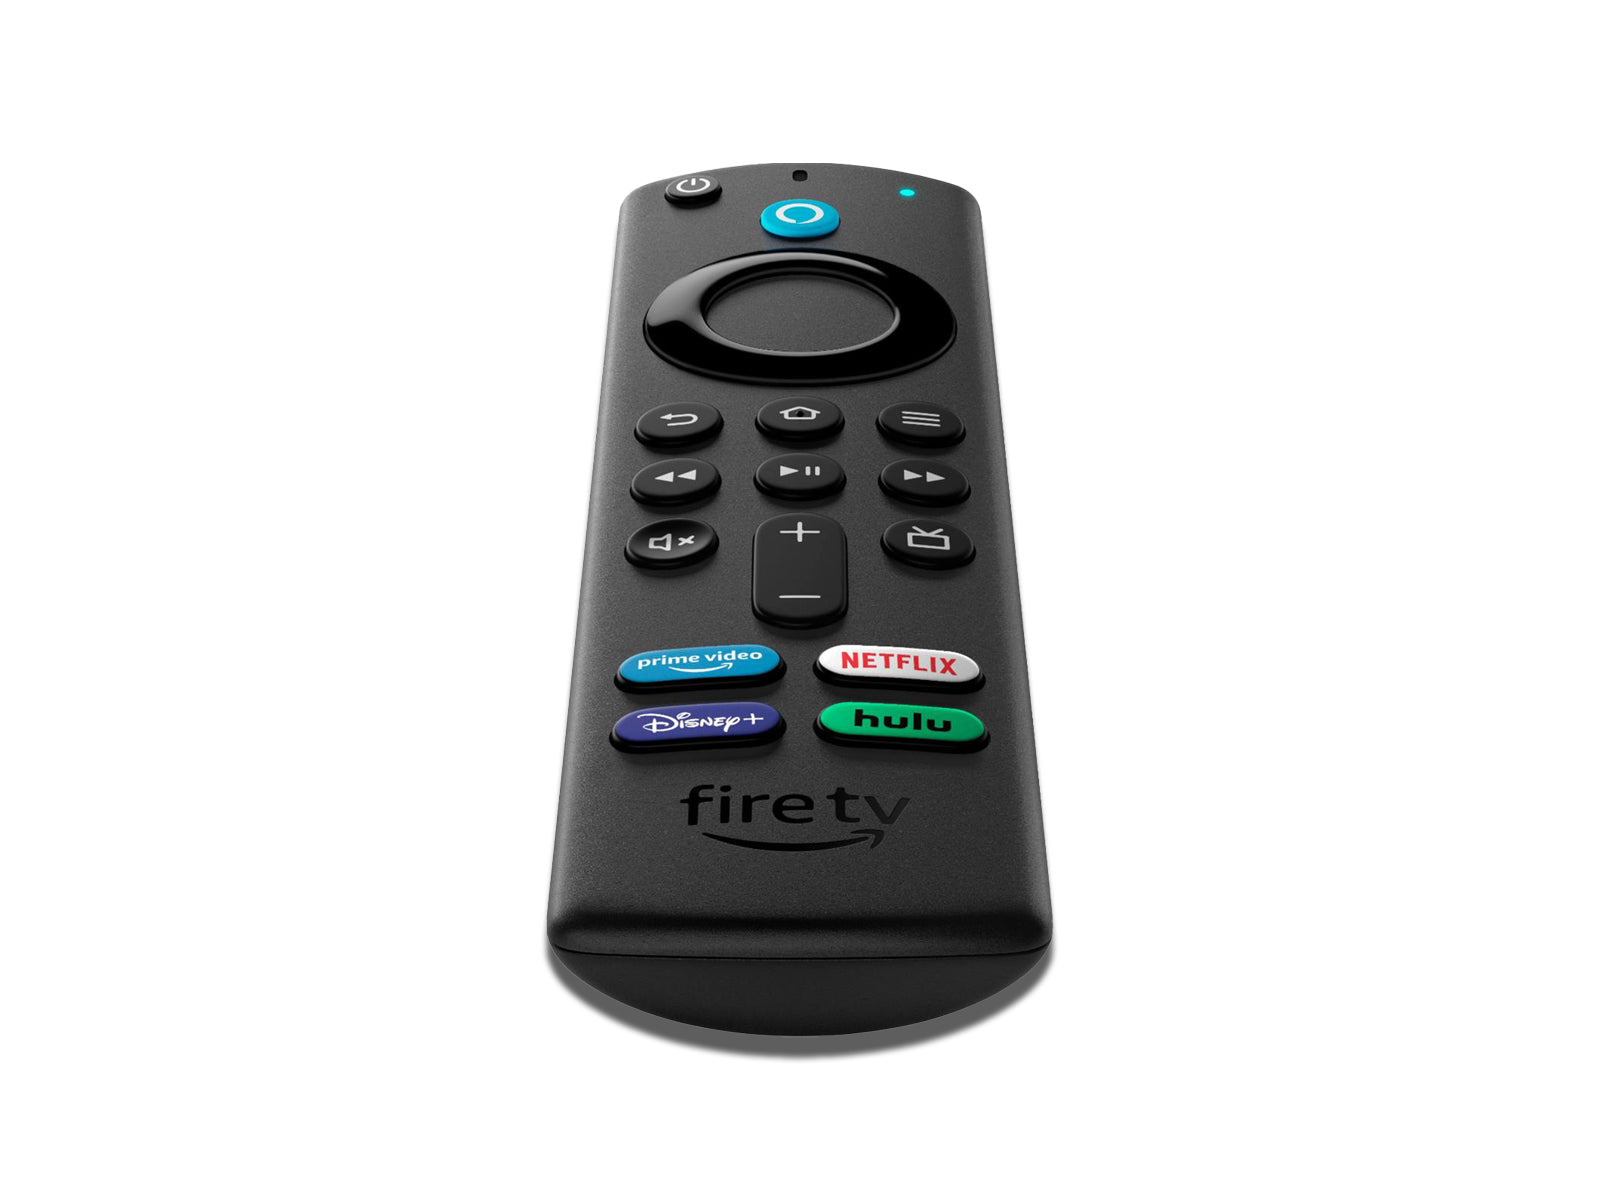 Bottom view of the Amazon Firestick Replacement remote control on the white background